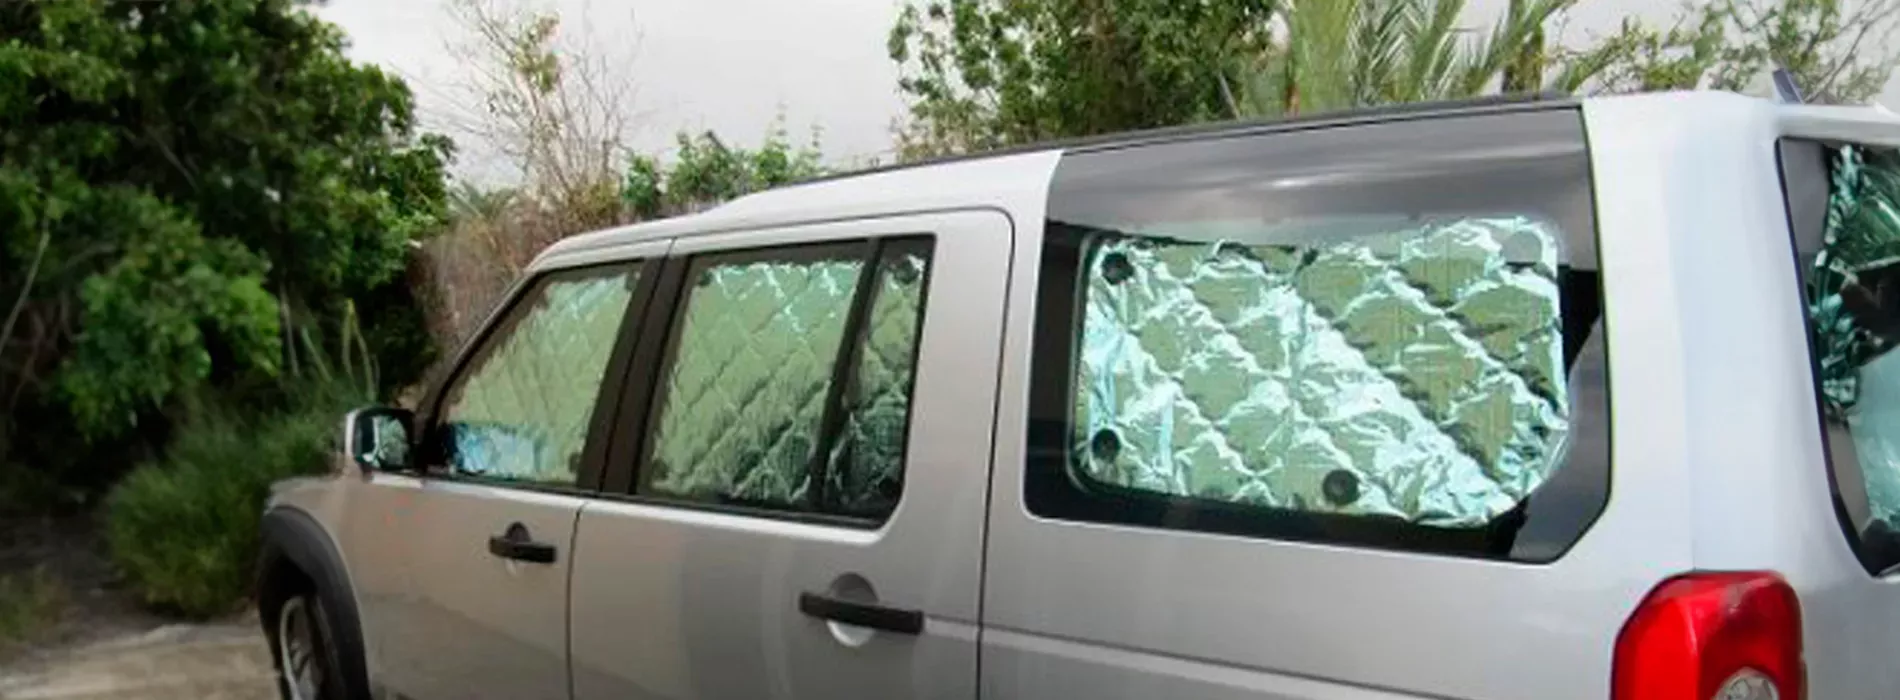 James Baroud Window Insulation Kit installed in a vehicle, optimizing temperature control - Outside view